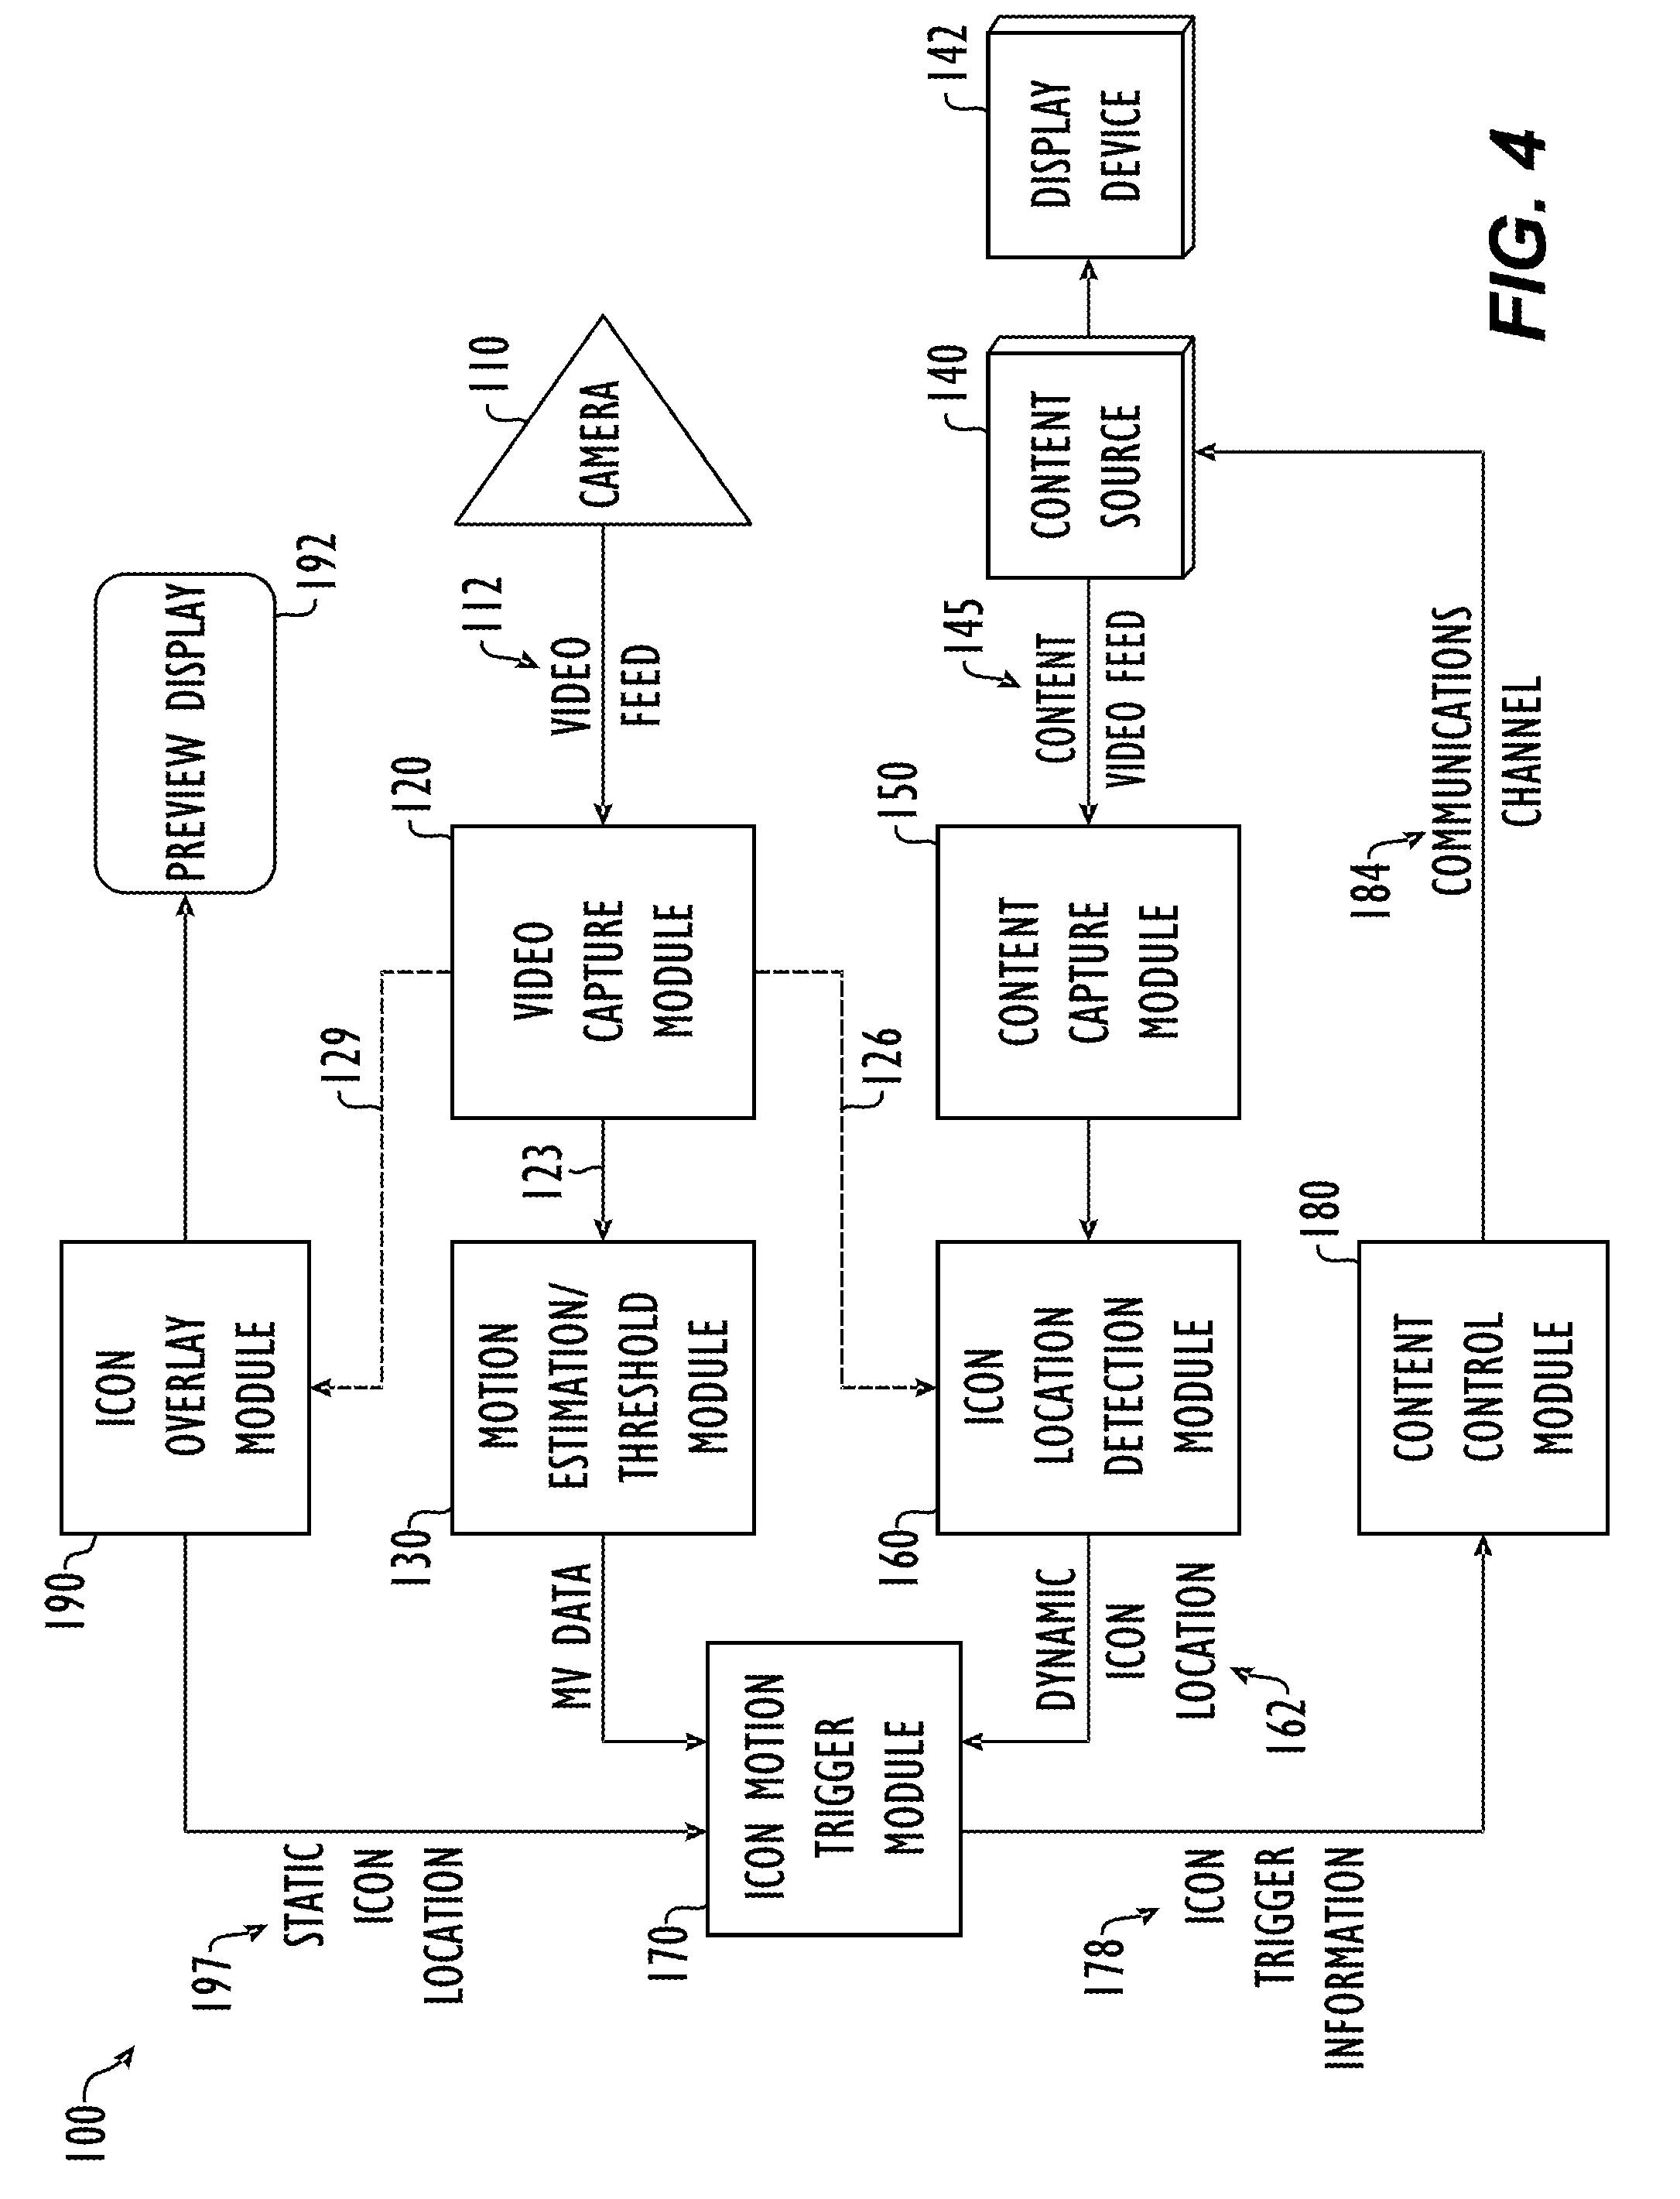 System and Method for Controlling Presentations and Videoconferences Using Hand Motions